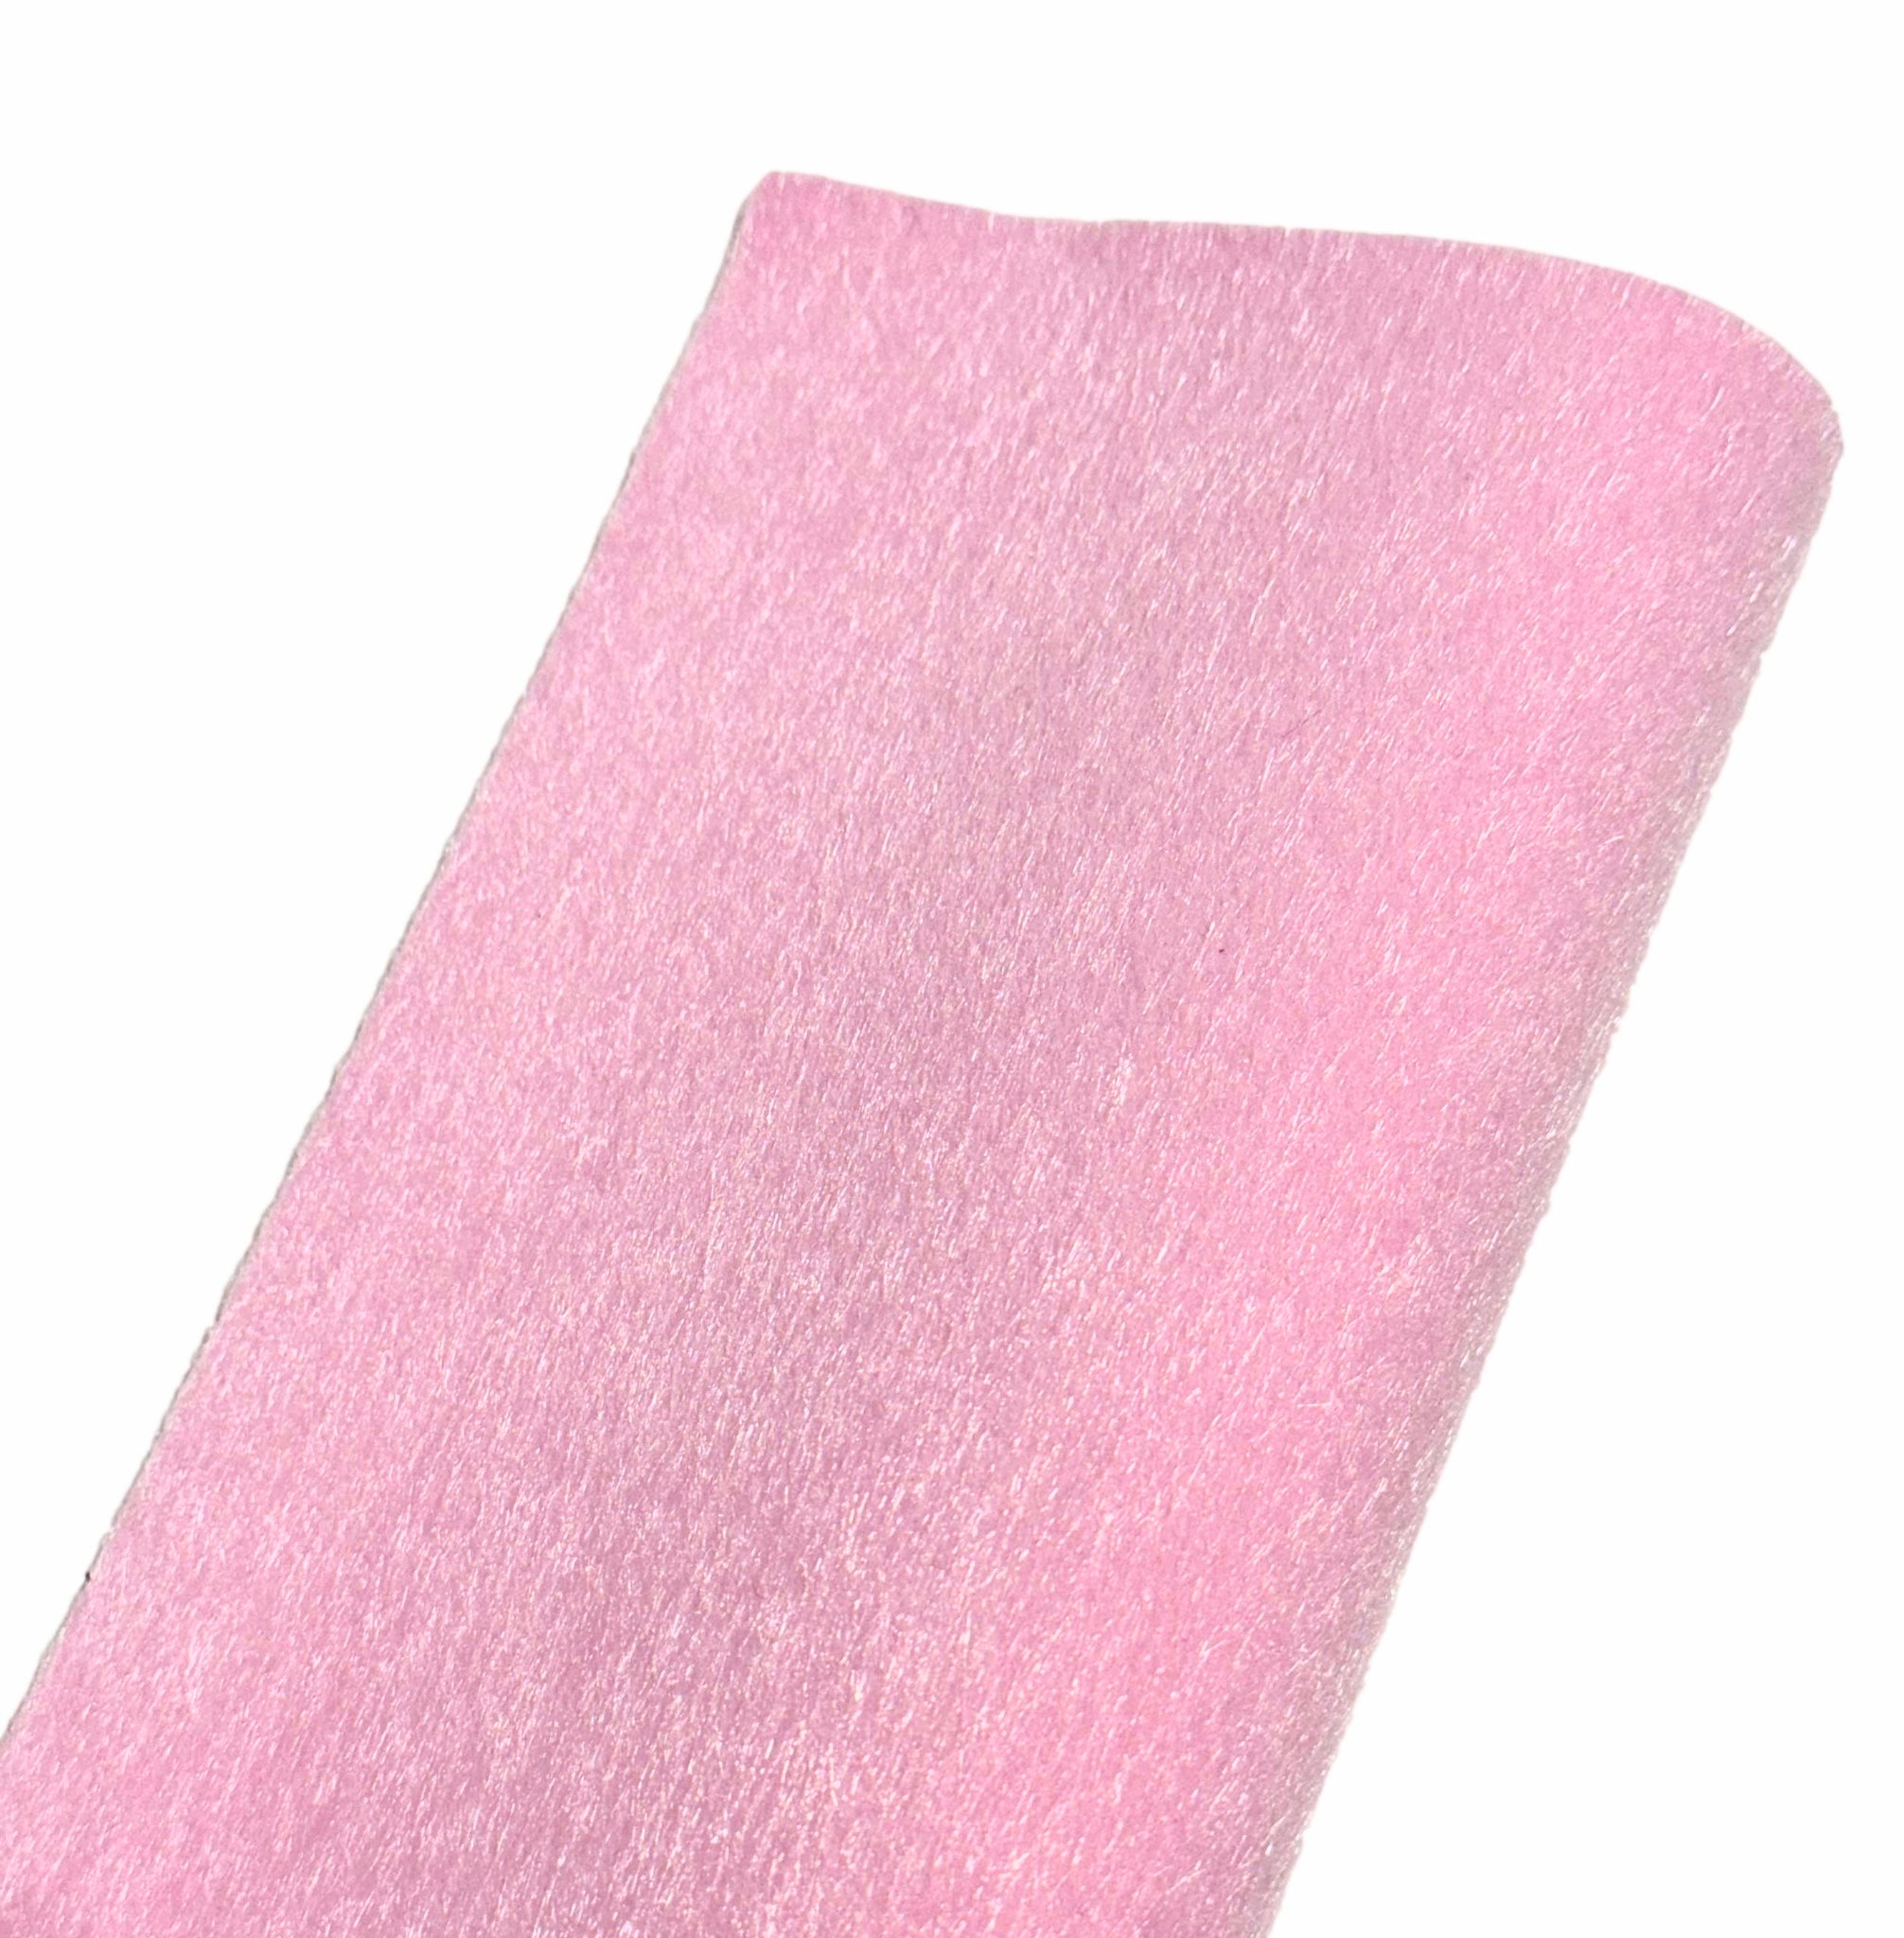 NEW! Pink Bunny Fur w/ Pink Felt Backing-READY TO SHIP – Pink